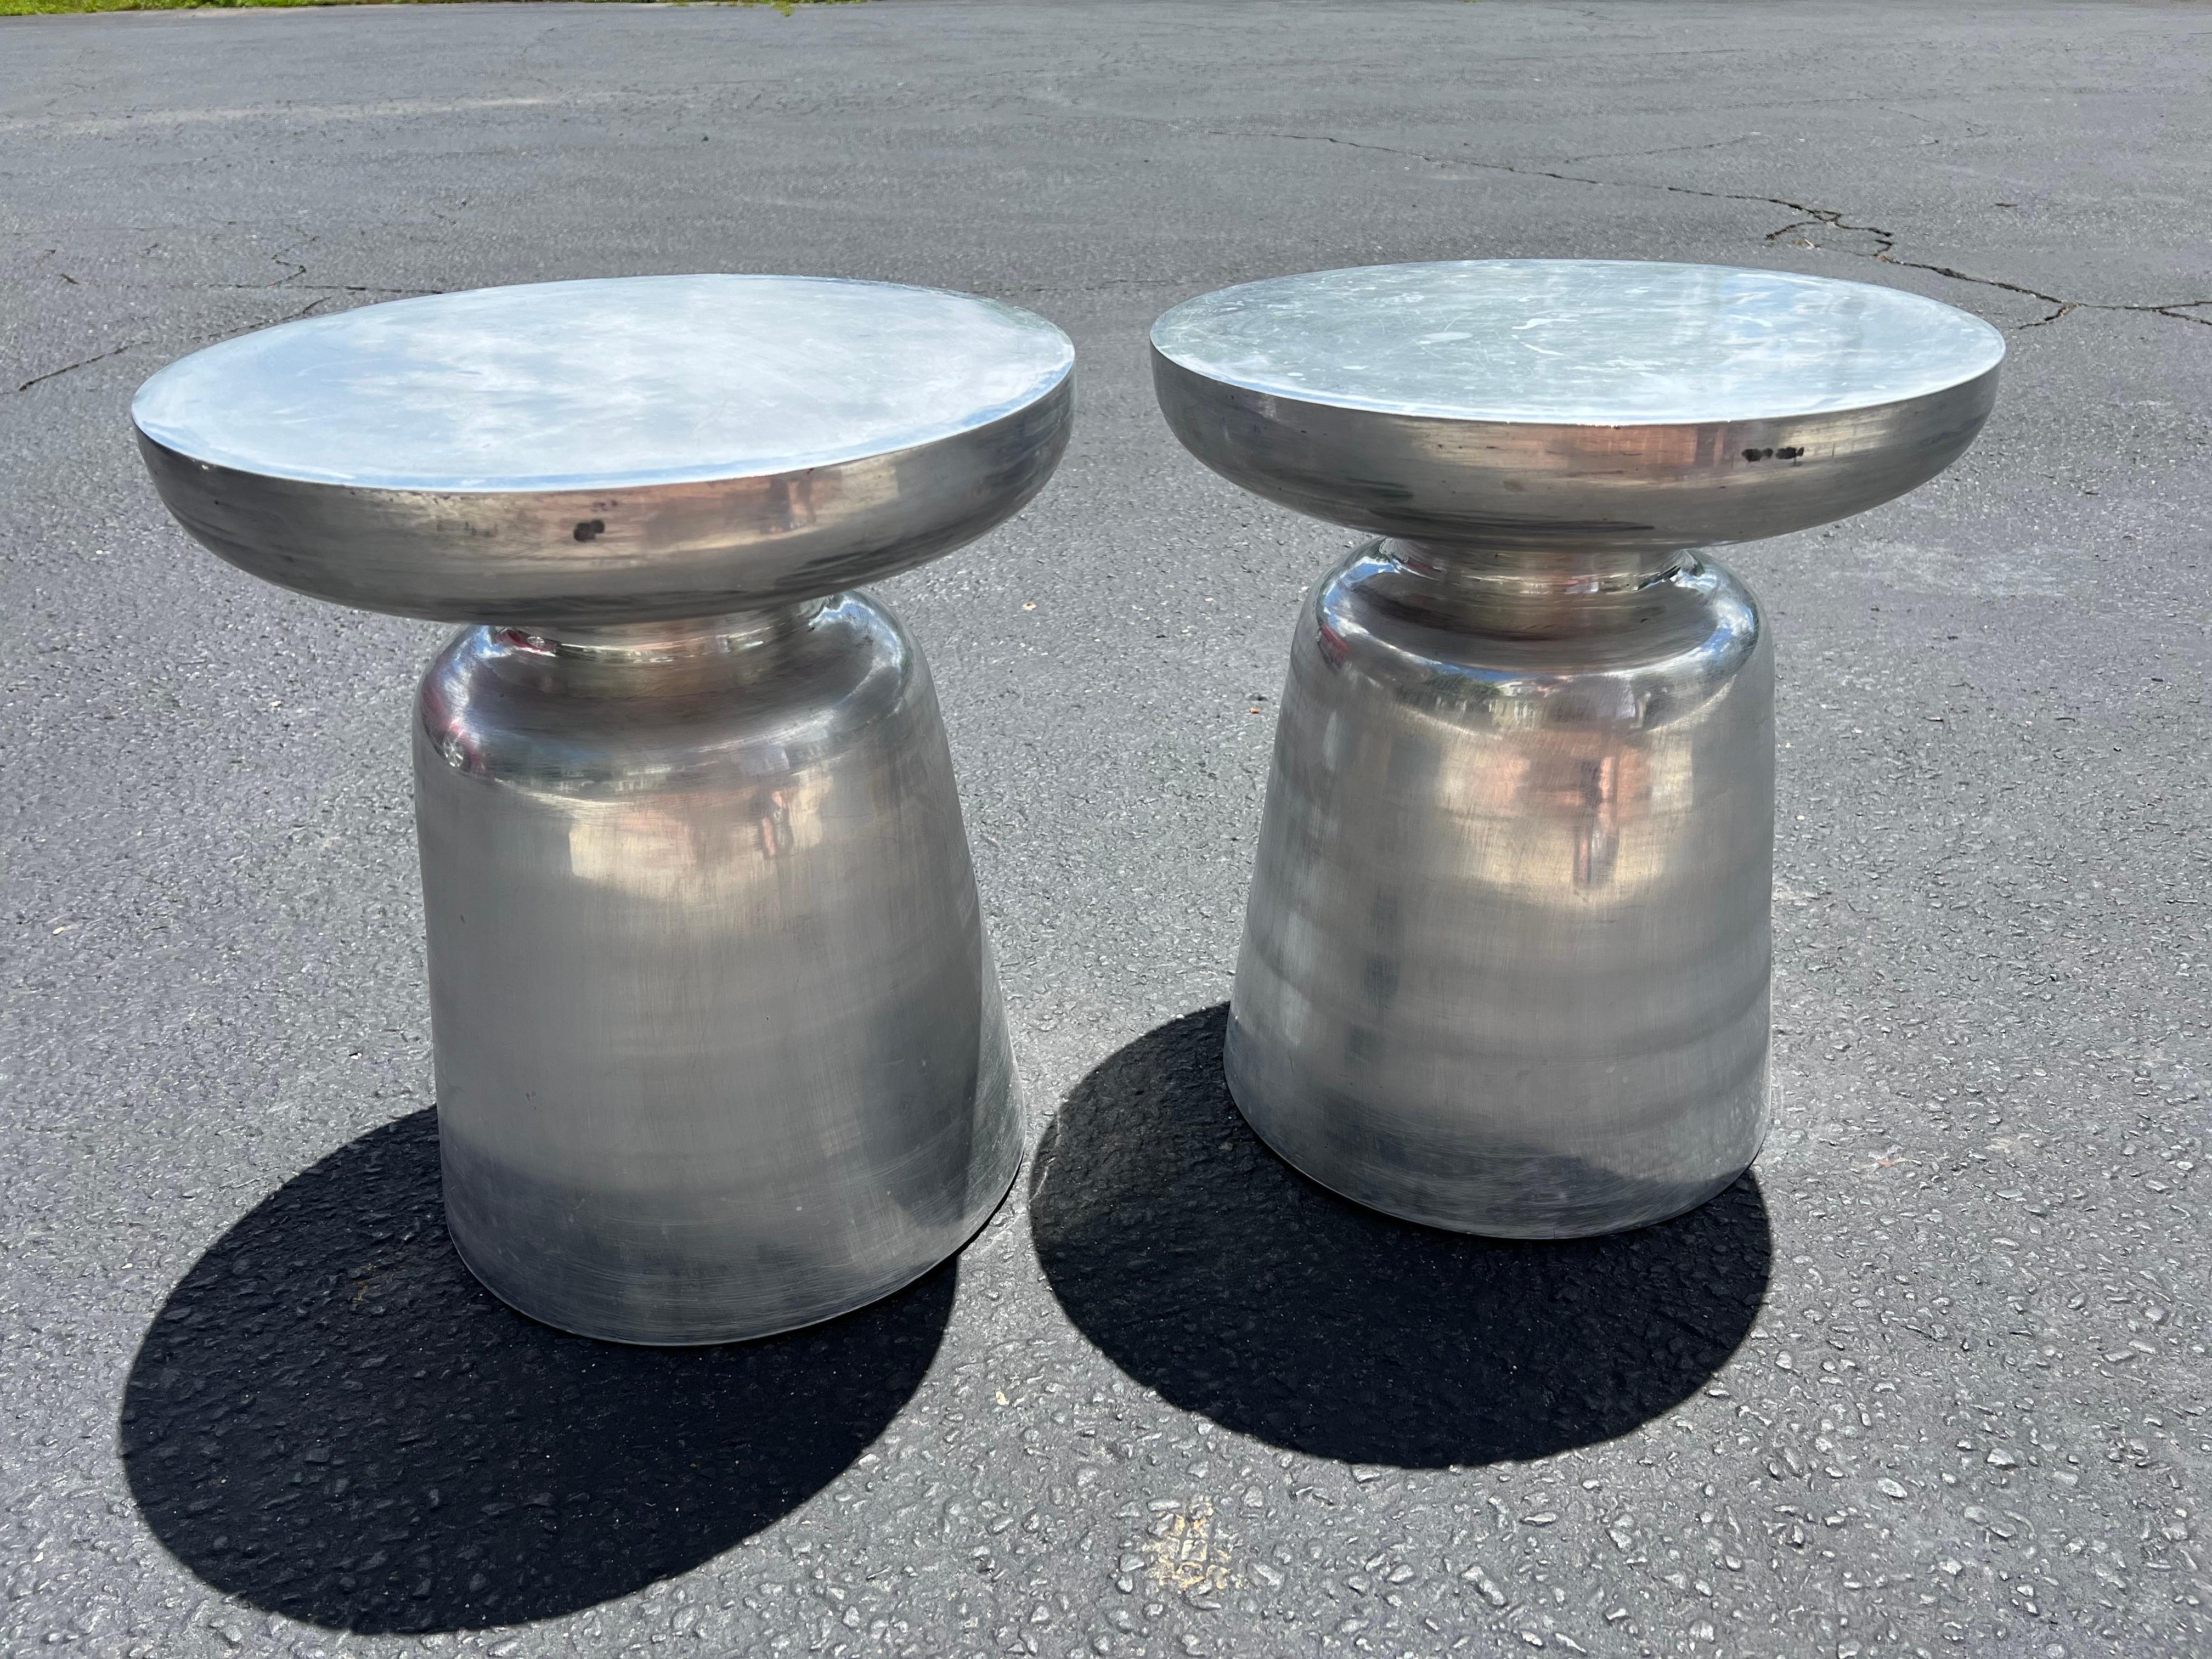 Pair of aluminum Martini tables. Weathered, industrial look. Perfect for that bachelor pad or small living space. Use as a table for martinis or as a plantstand. Or use outdoors by the pool.
     